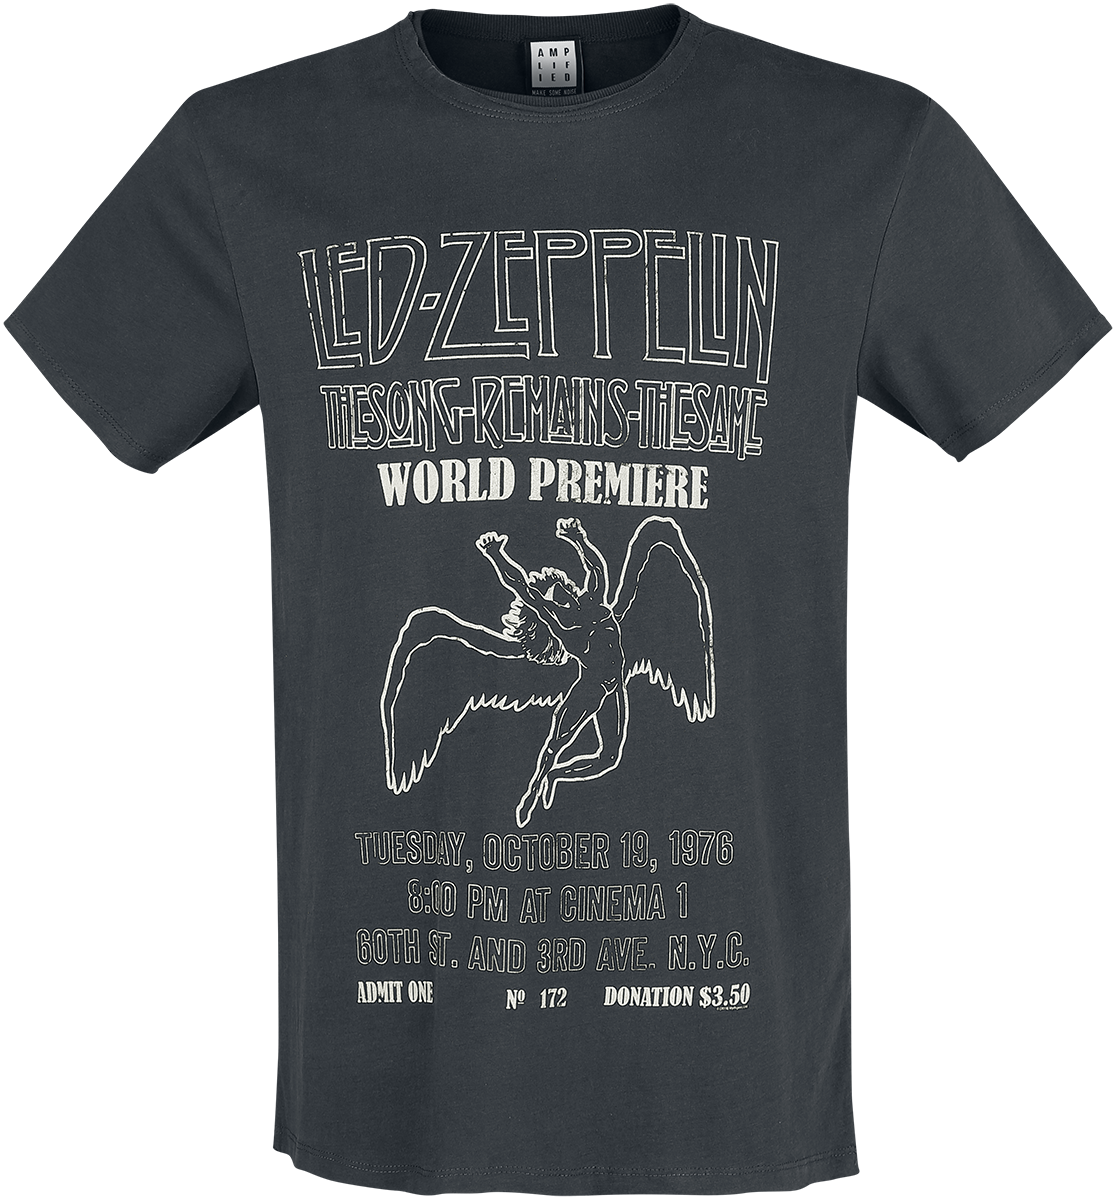 Led Zeppelin - Amplified Collection - Remains The Same - T-Shirt - charcoal image